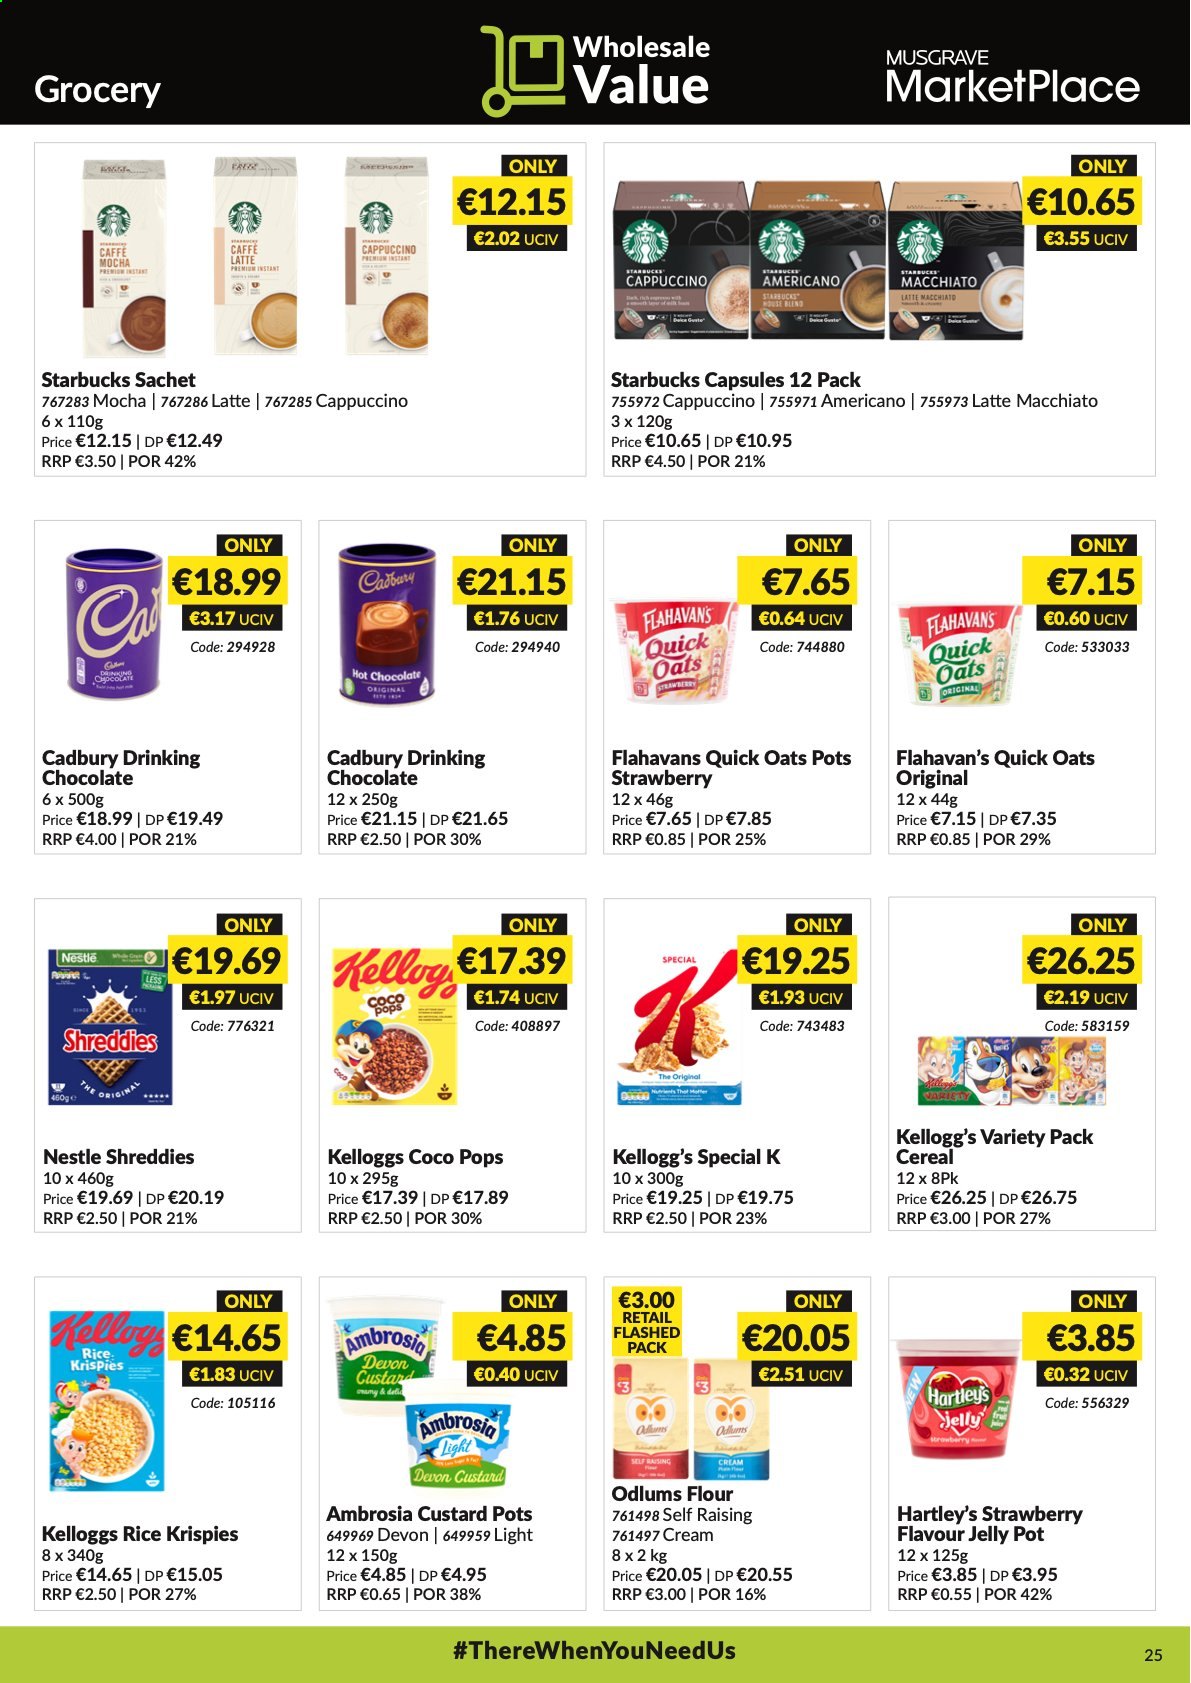 thumbnail - MUSGRAVE Market Place offer  - 29.08.2021 - 25.09.2021 - Sales products - custard, Nestlé, jelly, Kellogg's, Cadbury, flour, oats, cereals, coco pops, Rice Krispies, Quick Oats, hot chocolate, cappuccino, Starbucks, pot. Page 25.